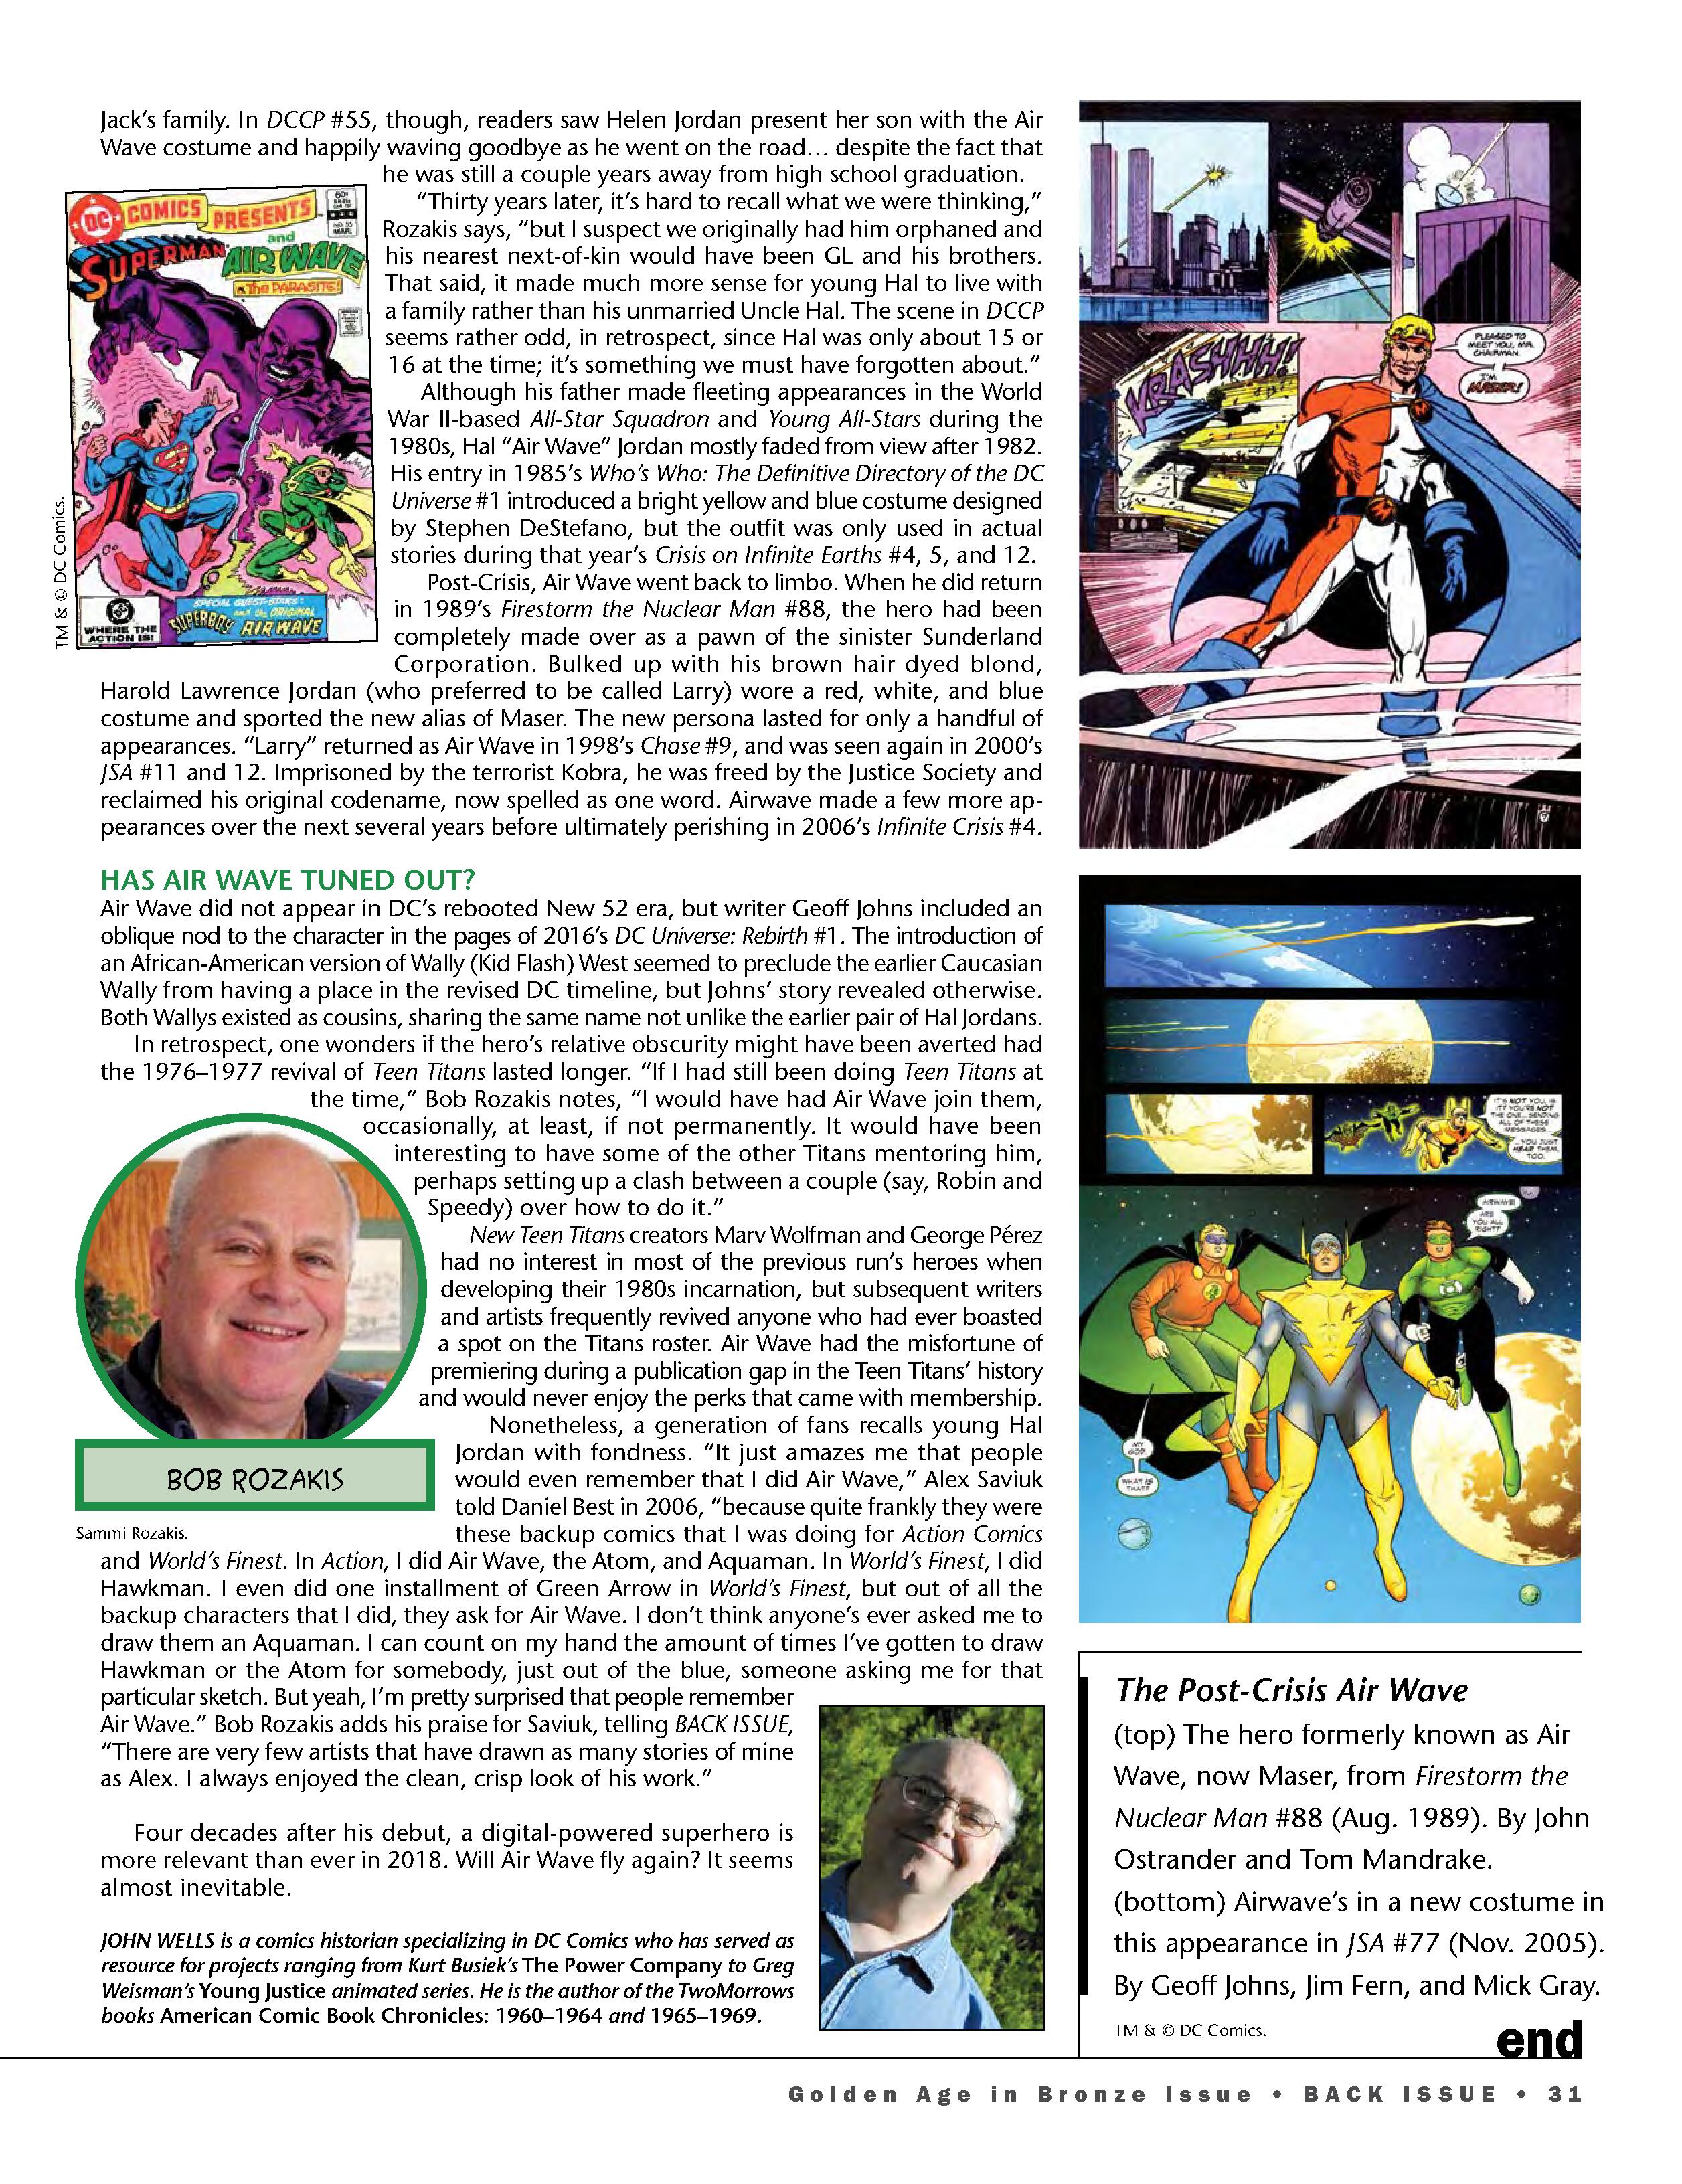 Read online Back Issue comic -  Issue #106 - 33